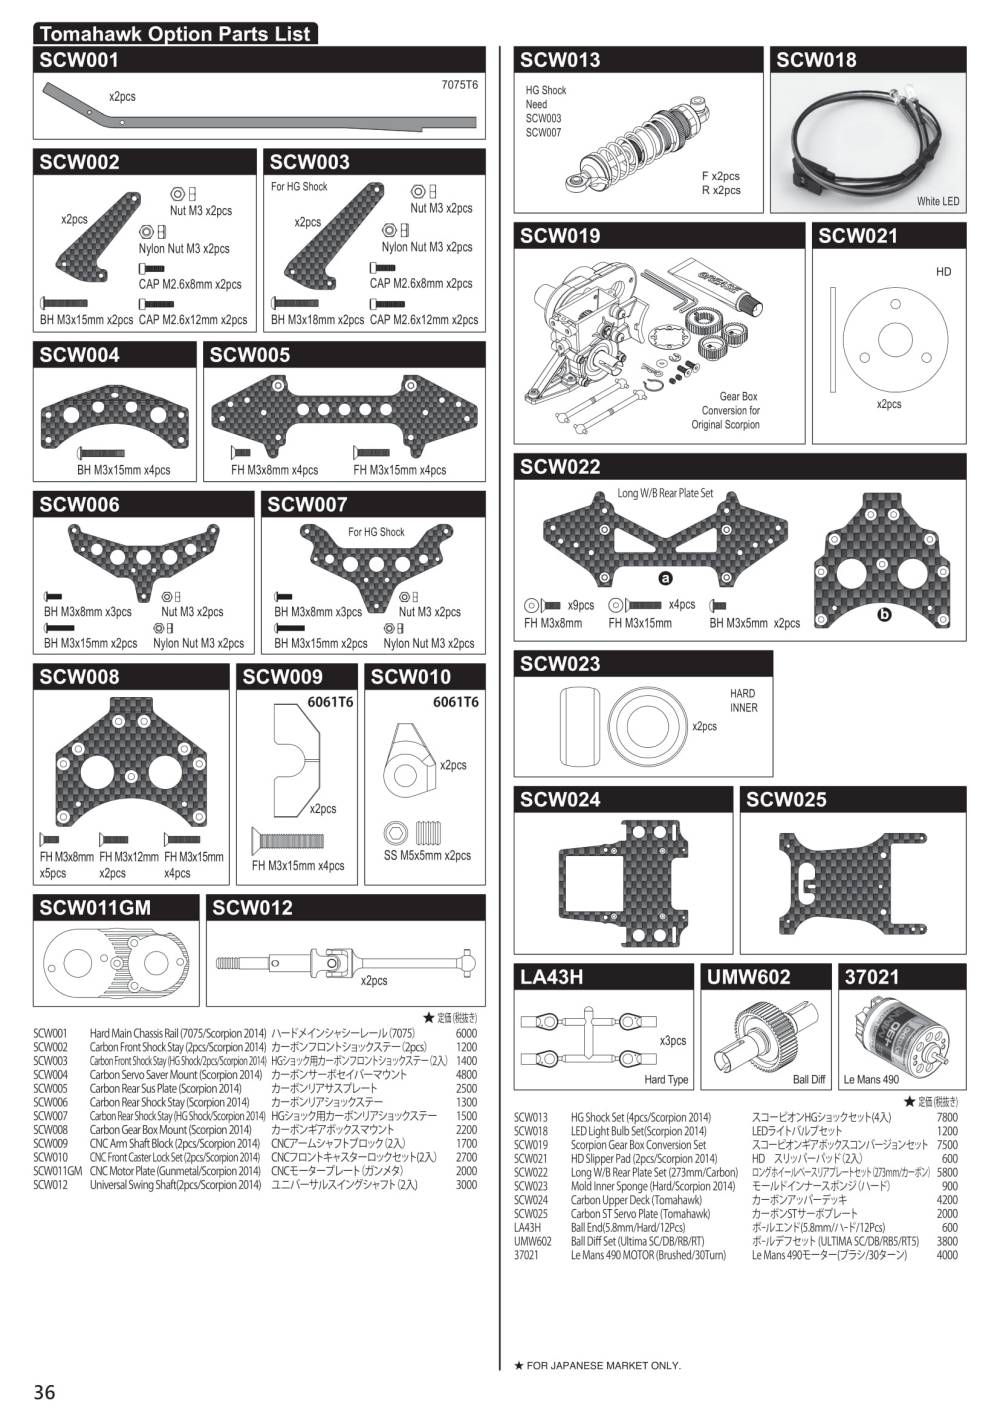 Kyosho - Tomahawk 2015 - 30615 - RC Model Parts